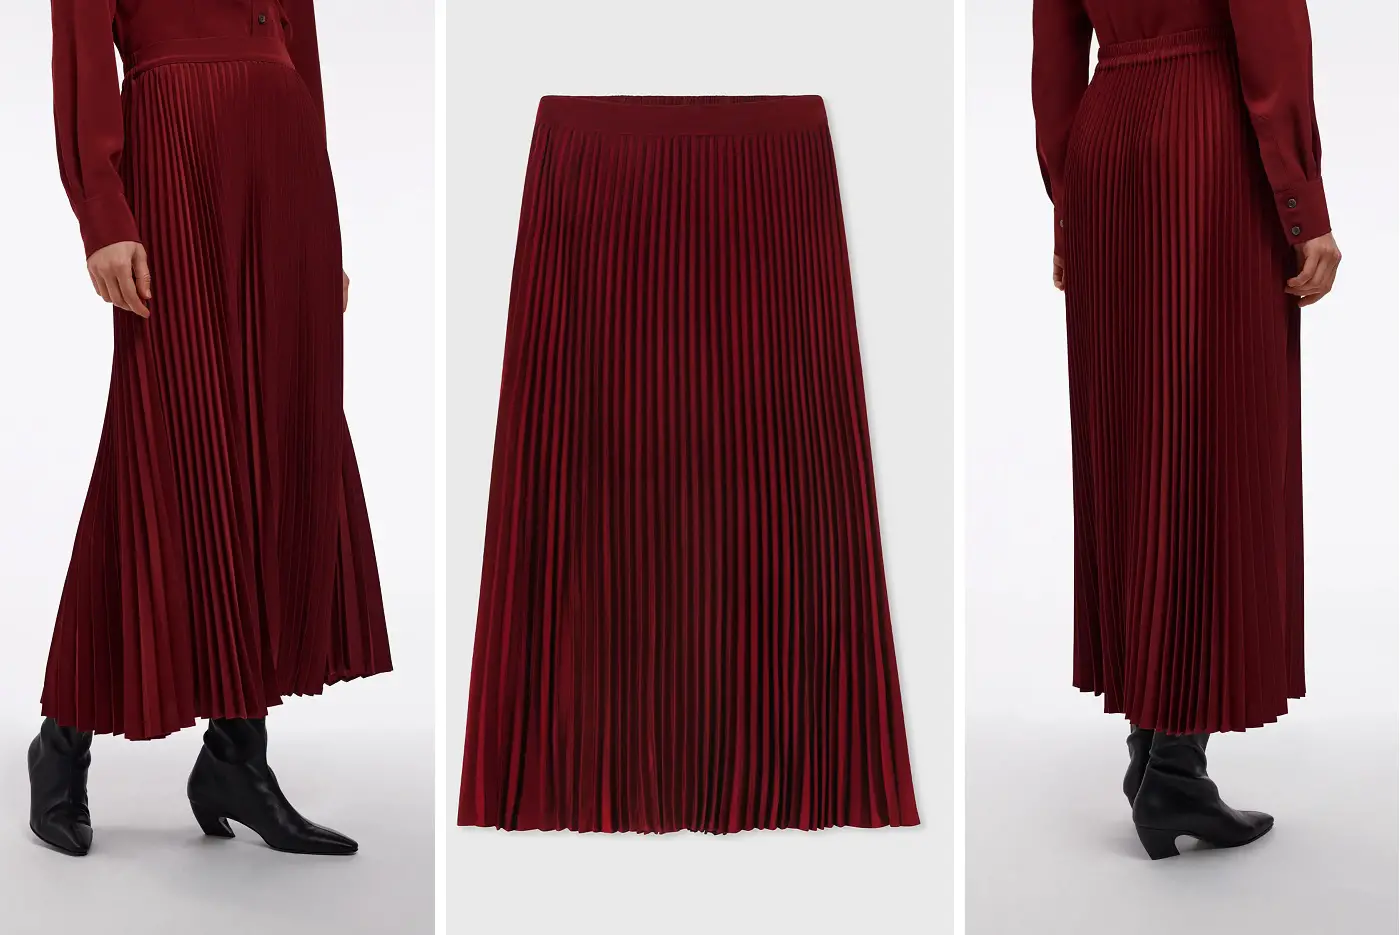 The Princess of Wales wore Co Pleated Elastic Waist Skirt in Stretch Crepe